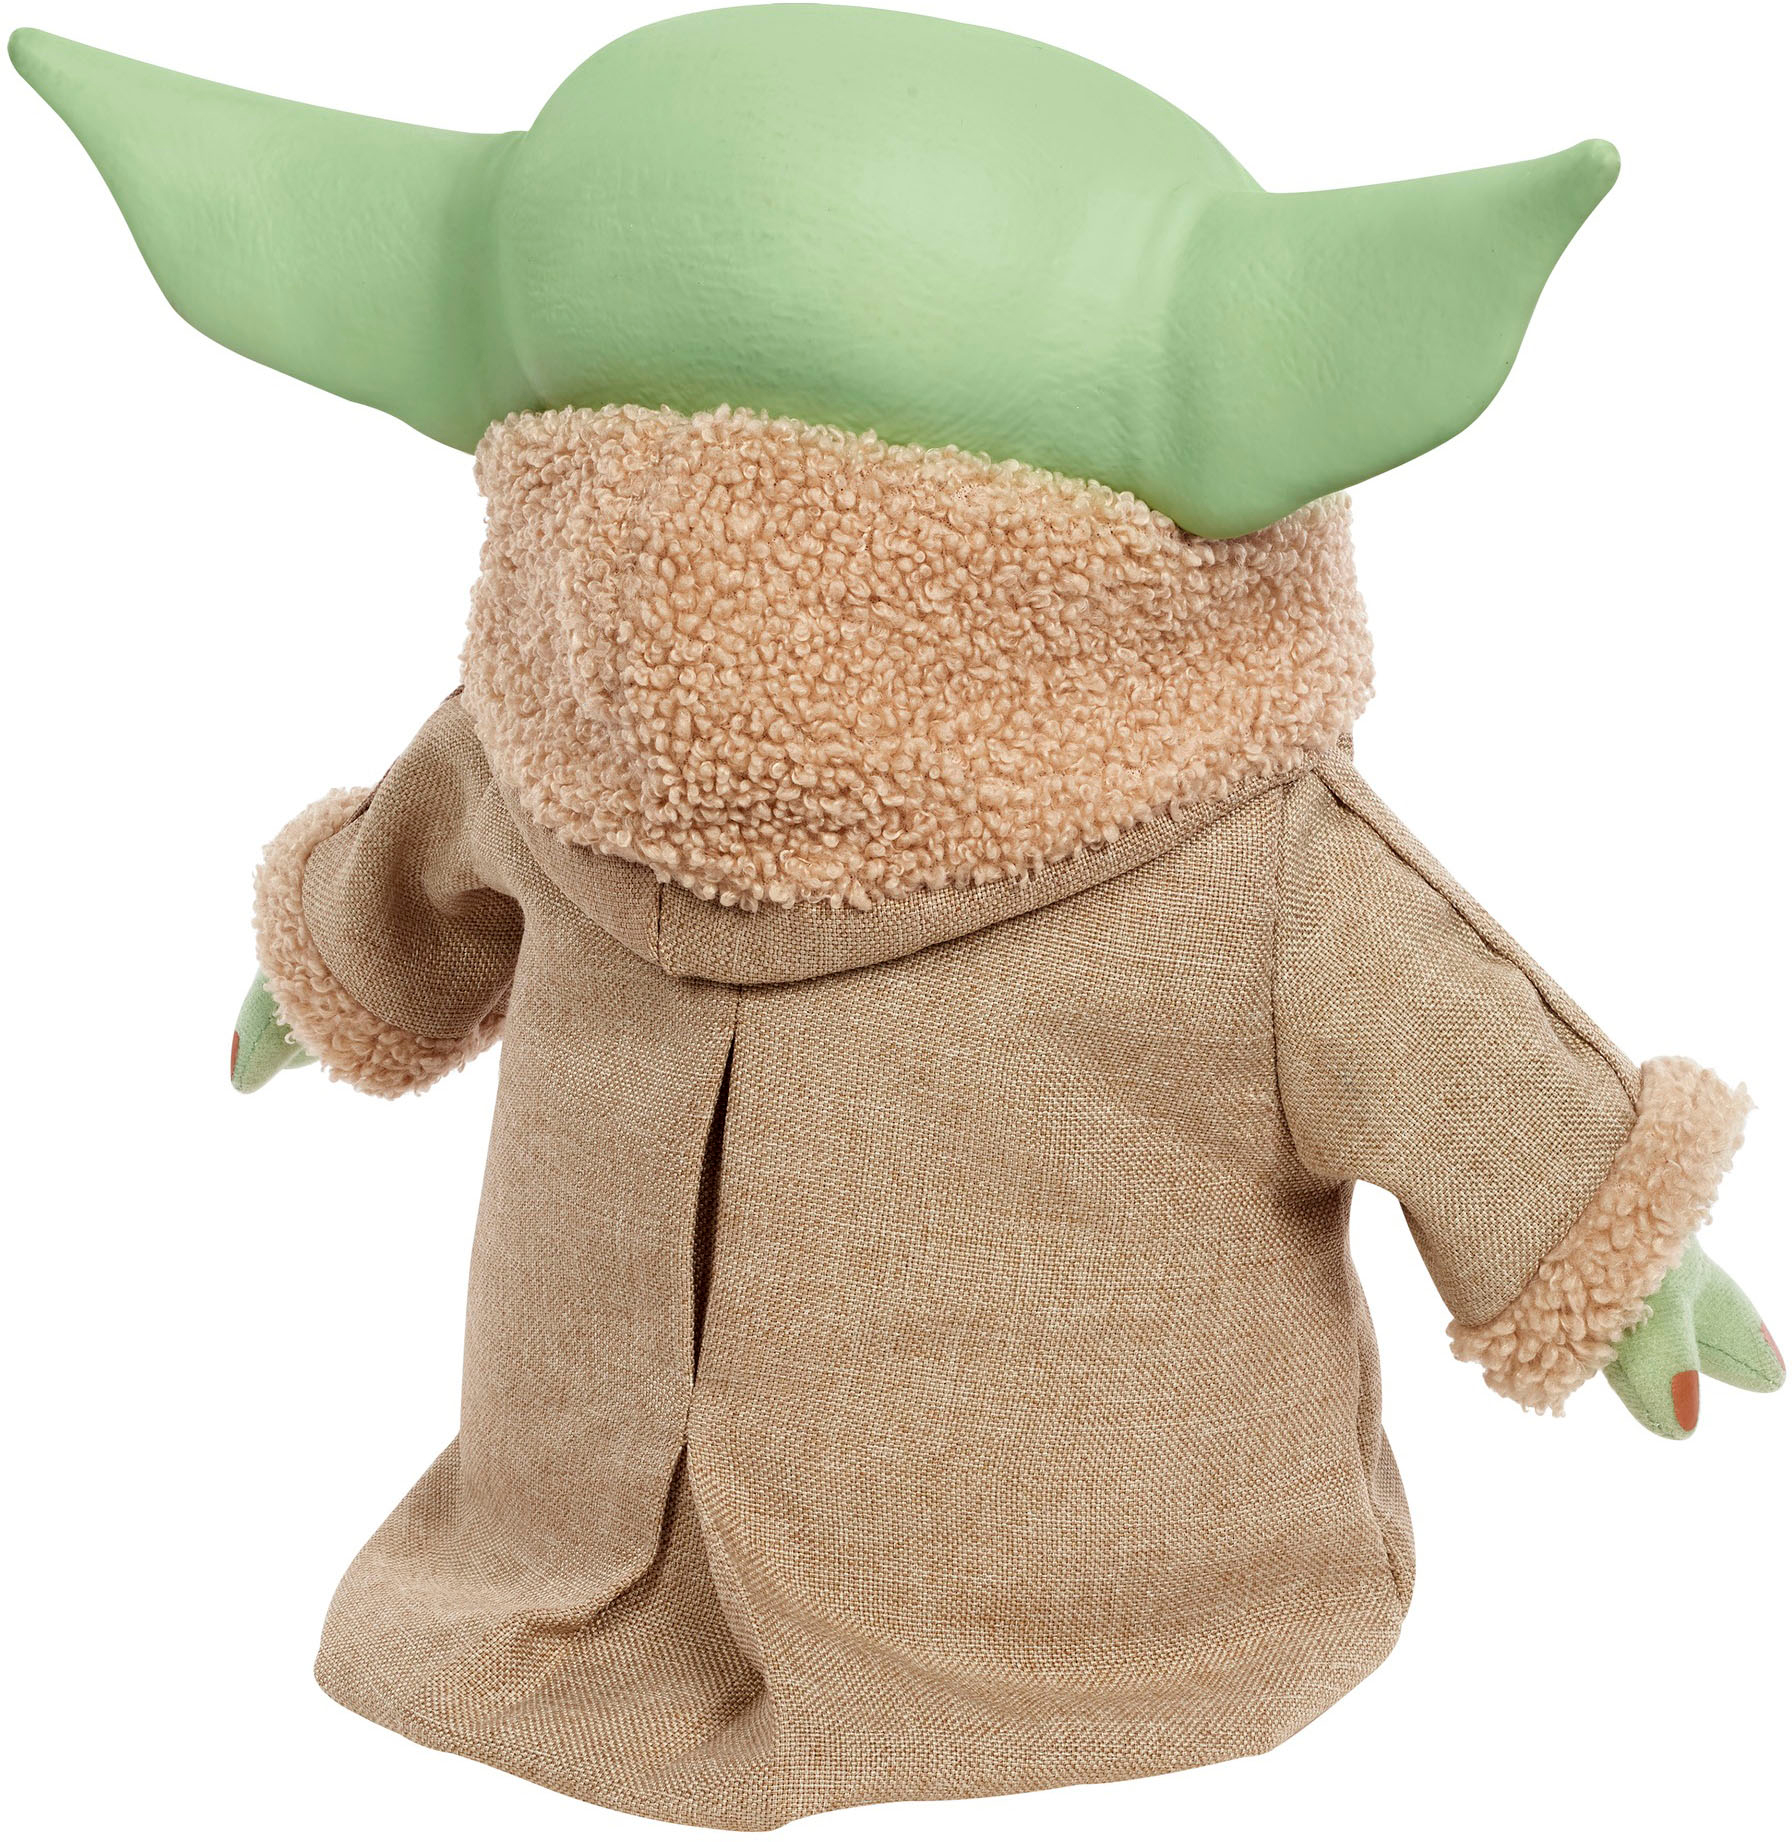  Star Wars Squeeze & Blink Grogu Feature Plush : Everything Else